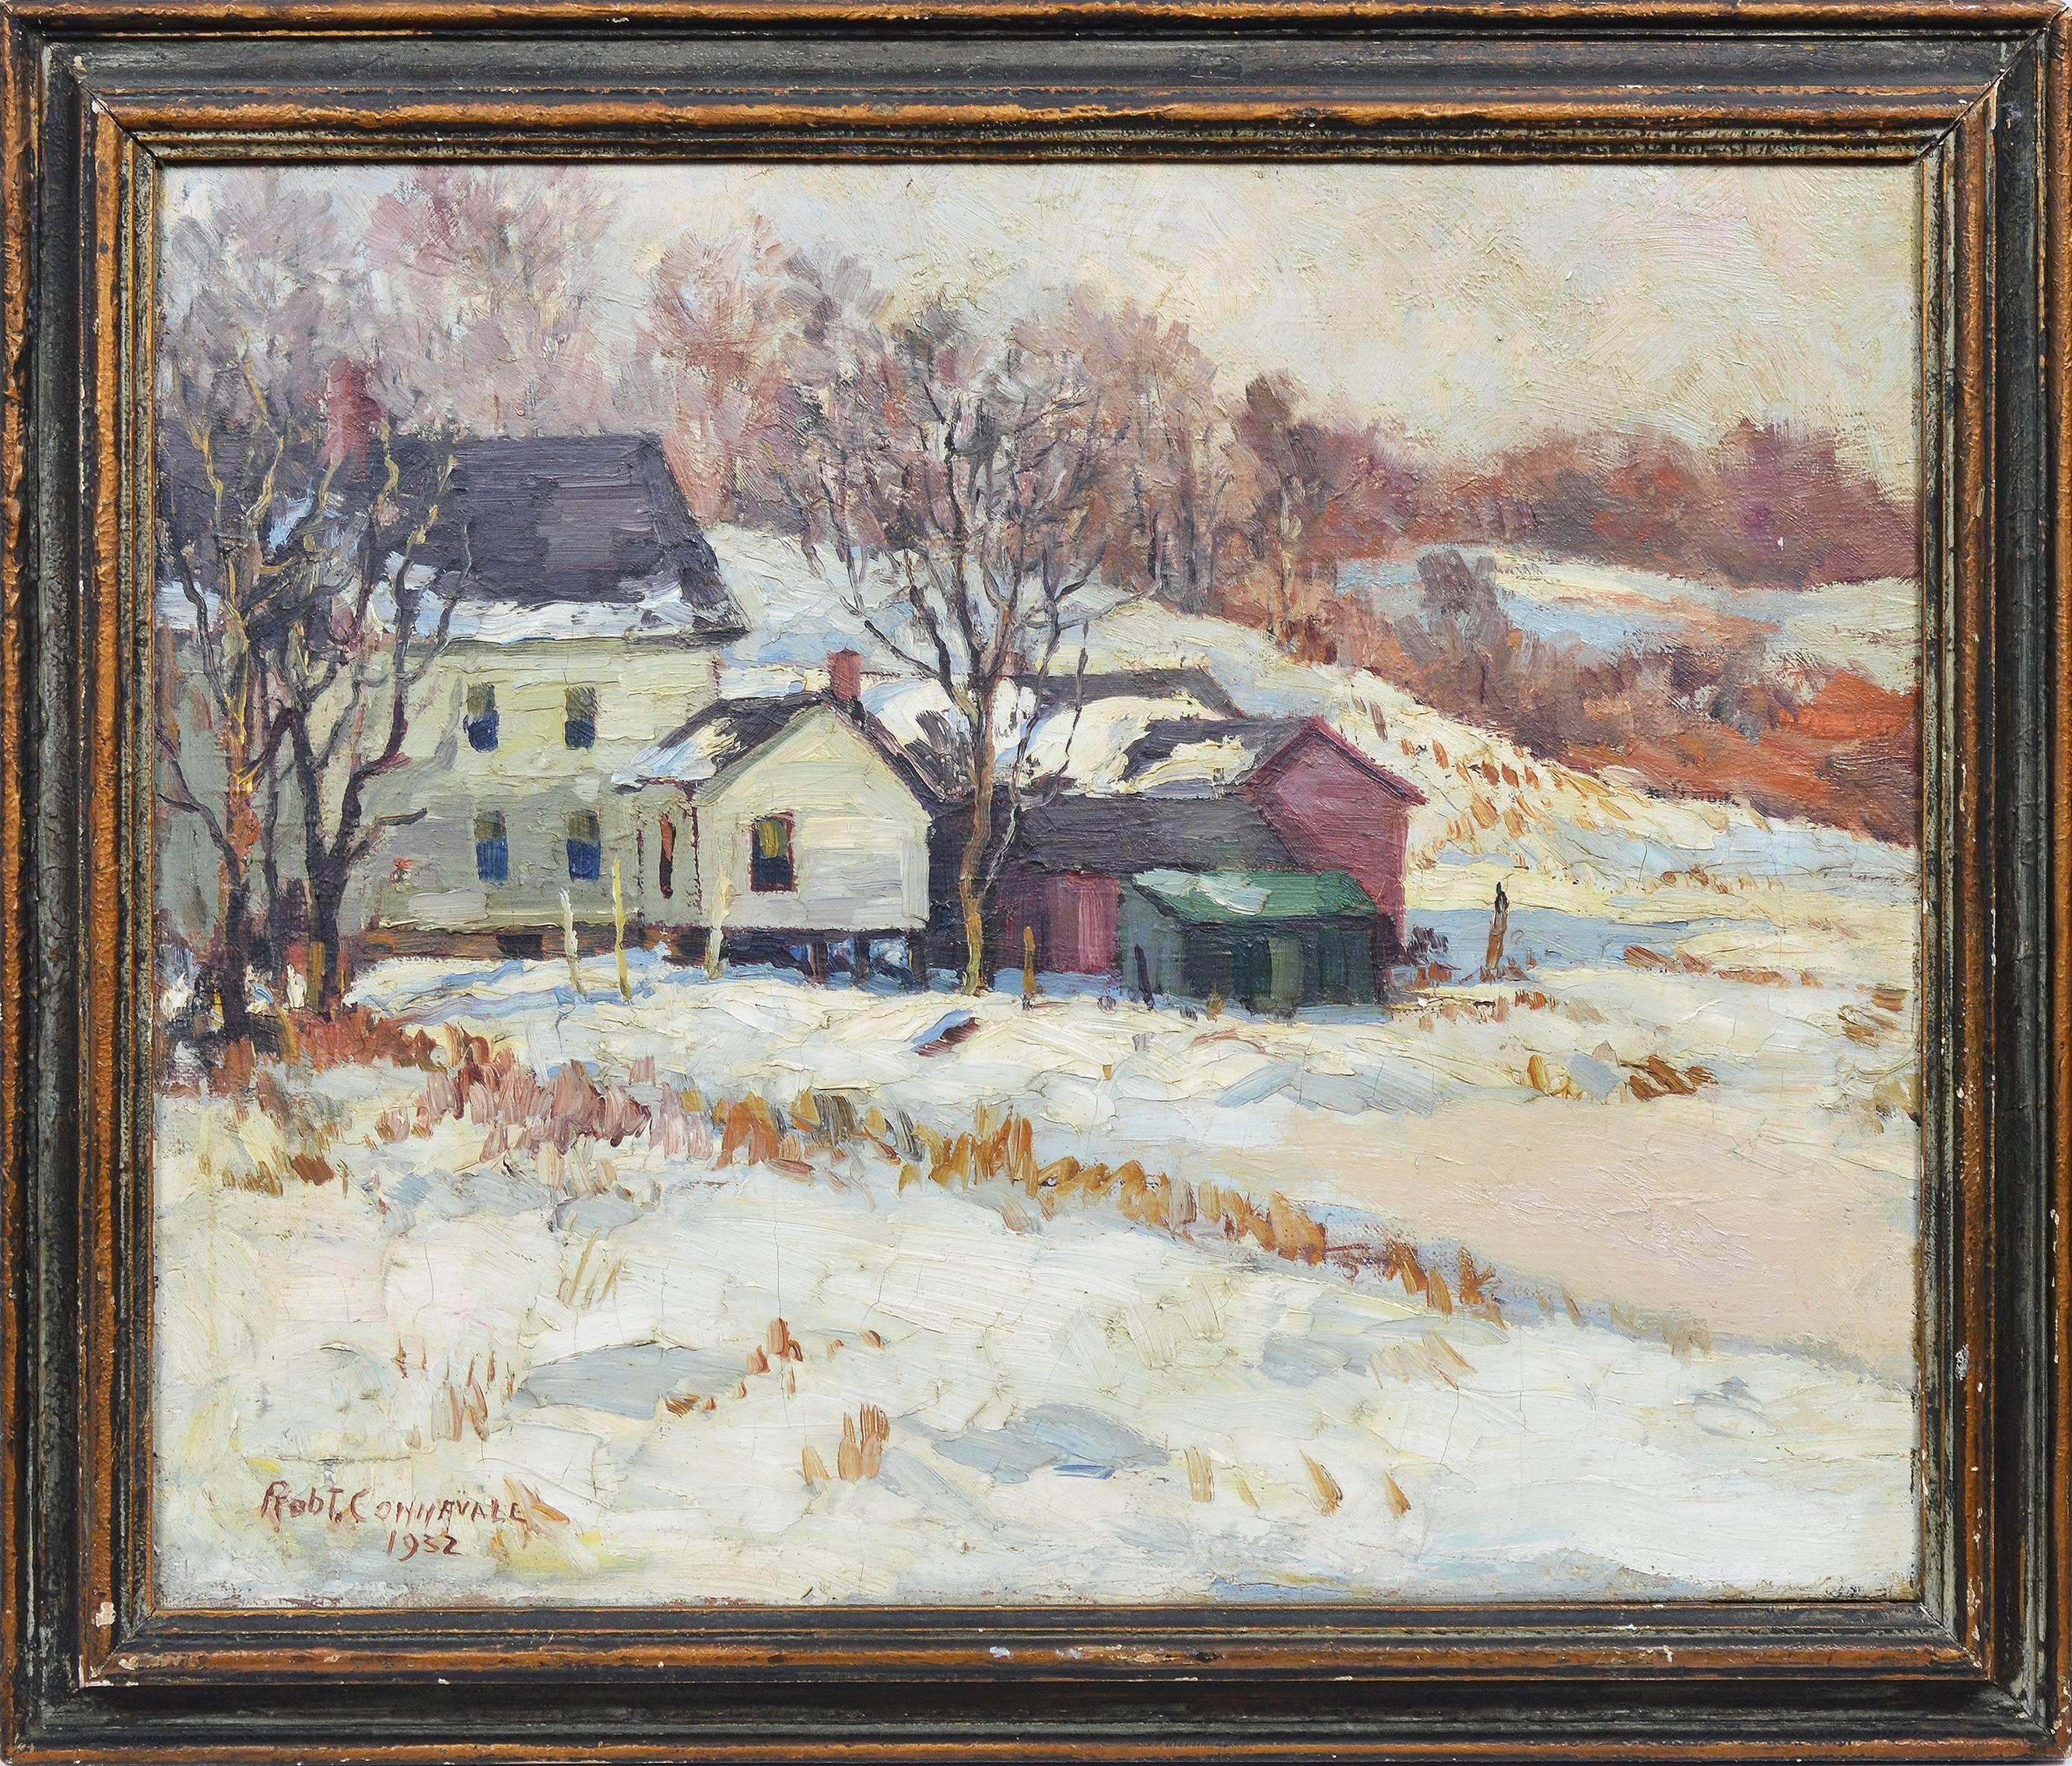 Impressionist Winter Landscape - Painting by Robert Connavale